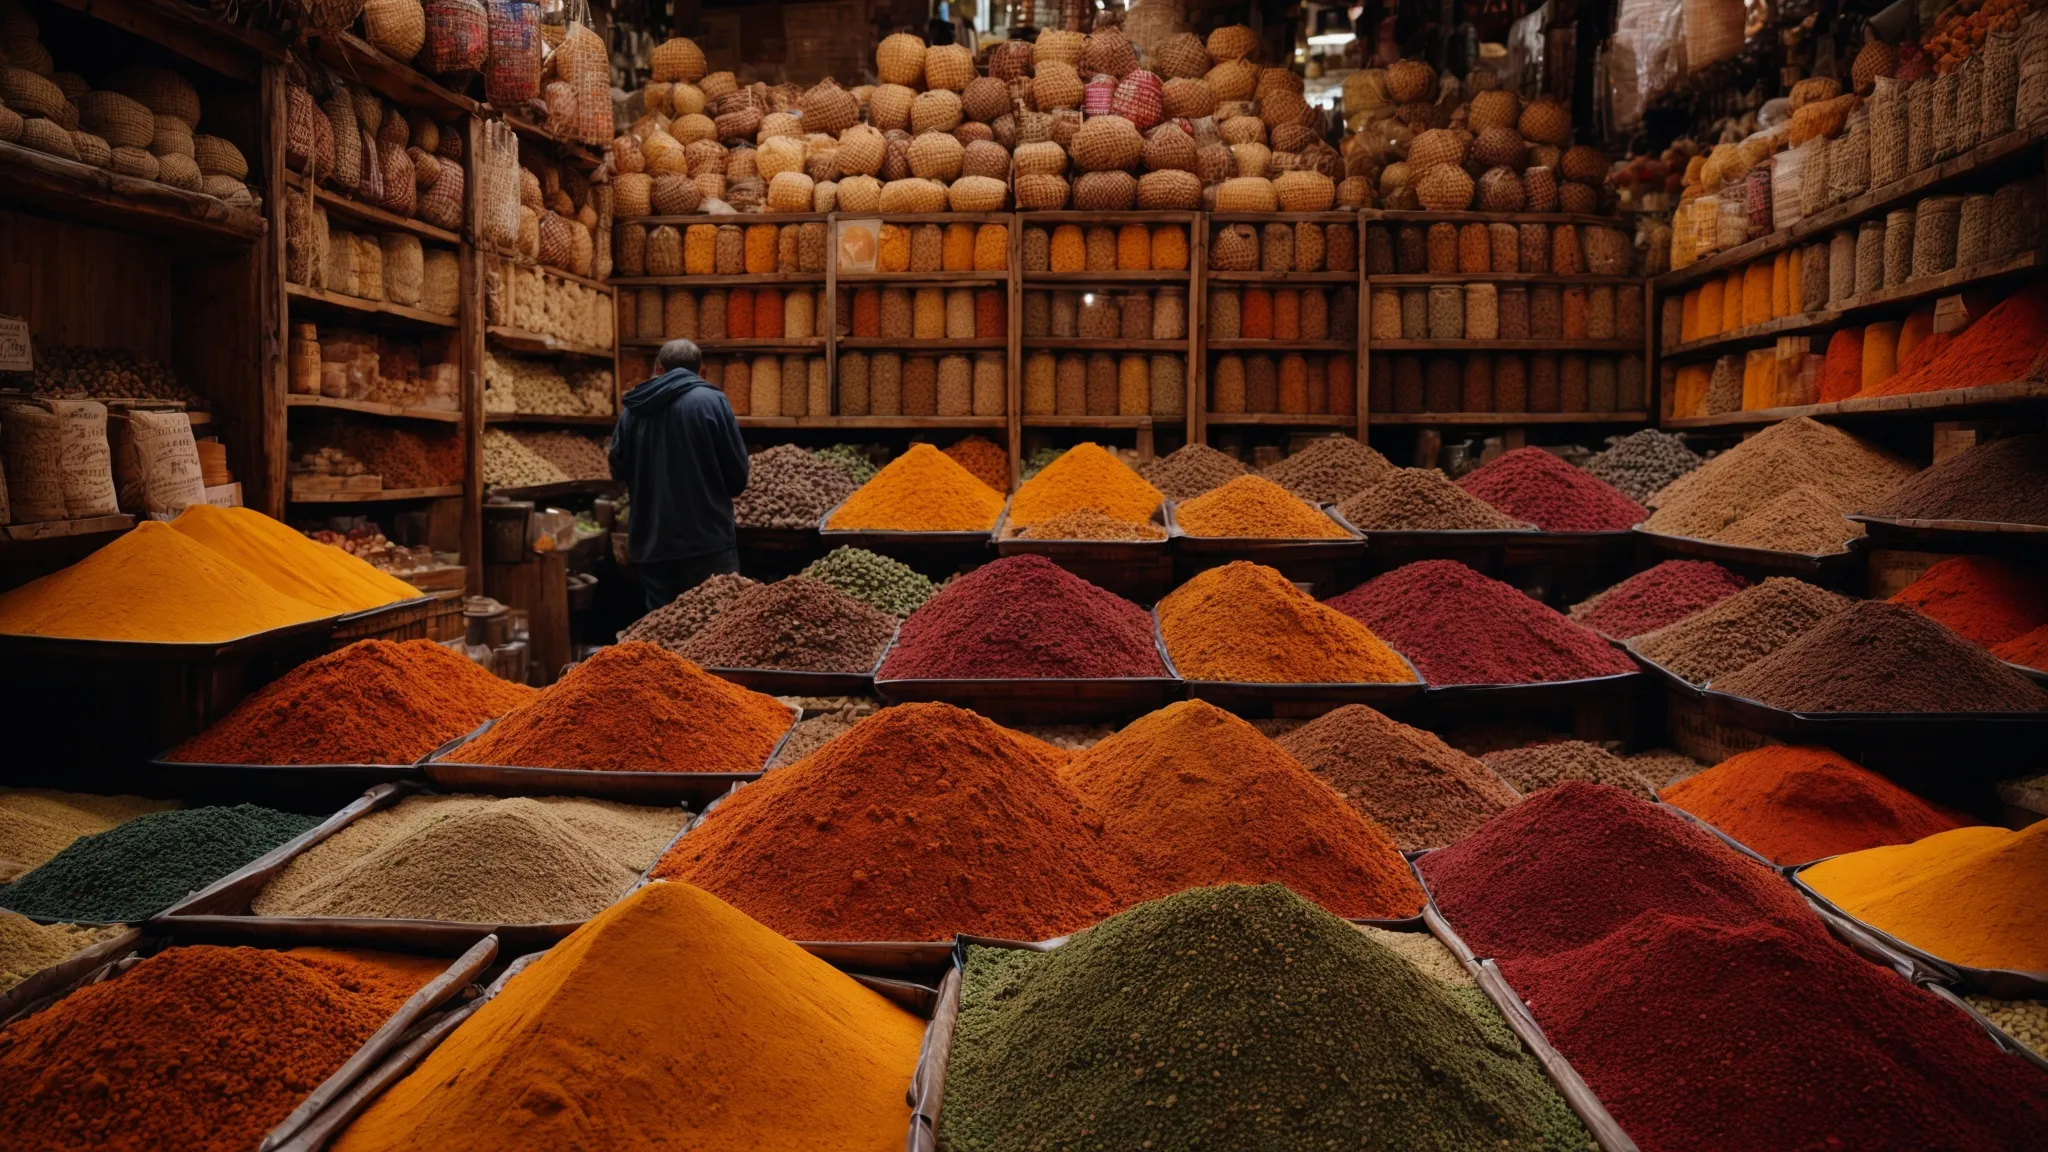 a person stands in an aromatic spice market, surrounded by a vivid tapestry of colors and scents.